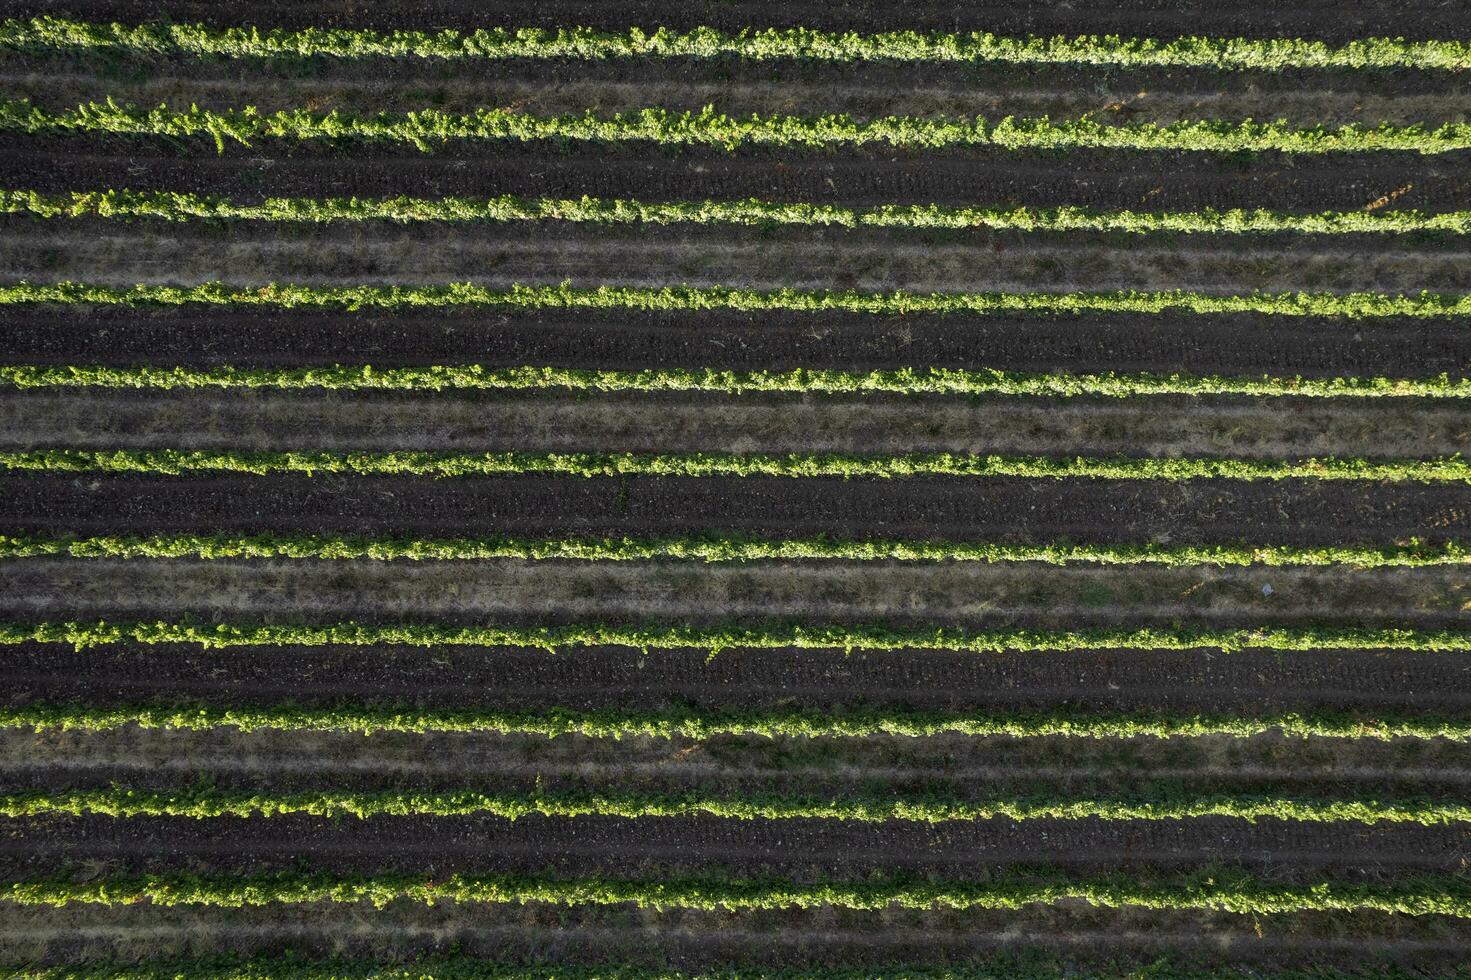 Aerial view of the rows of a vineyard Tuscany Italy photo